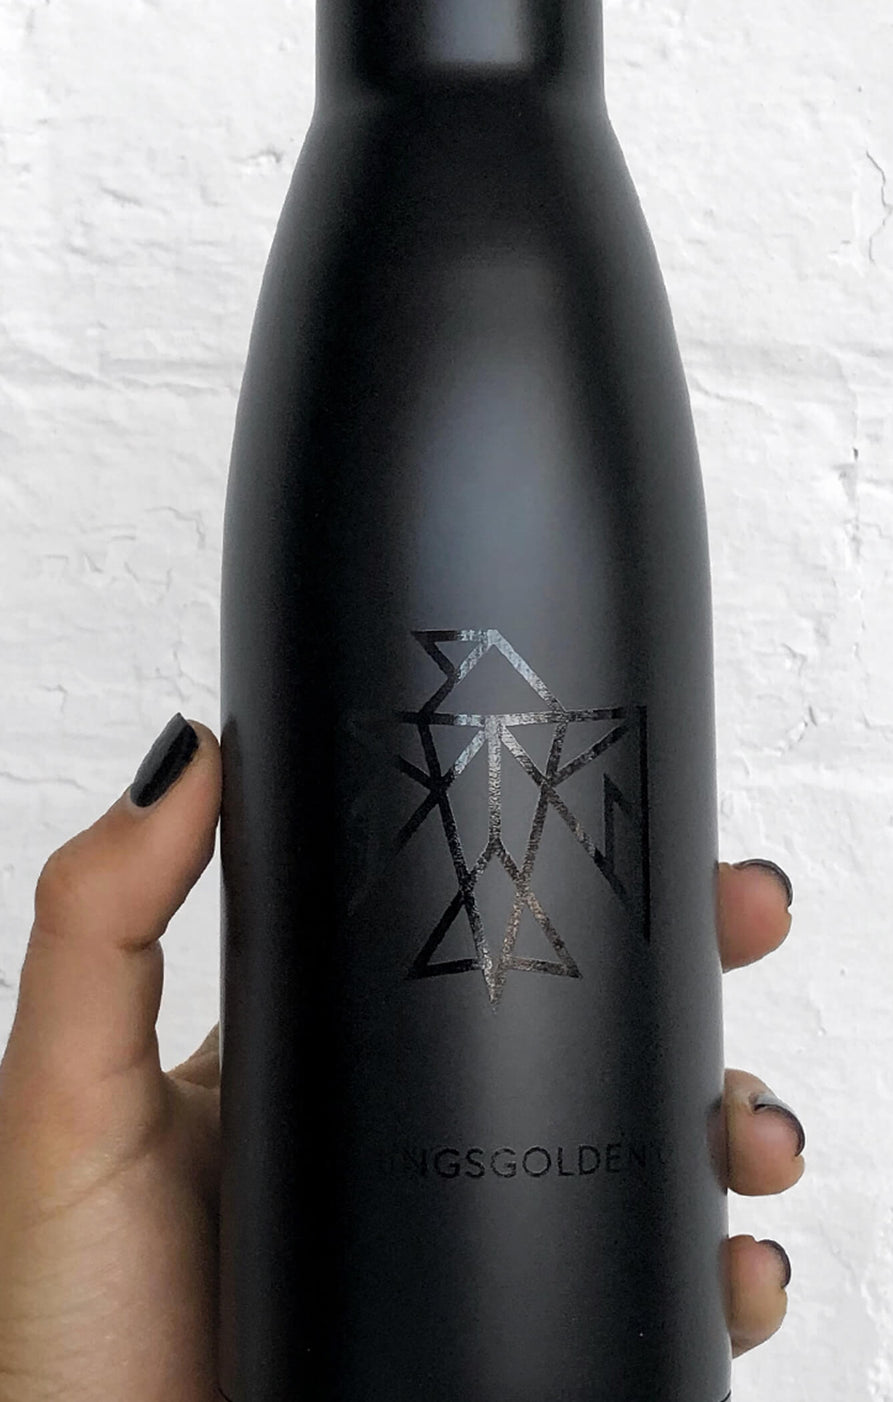 THE A.T.G STAINLESS STEEL BOTTLE